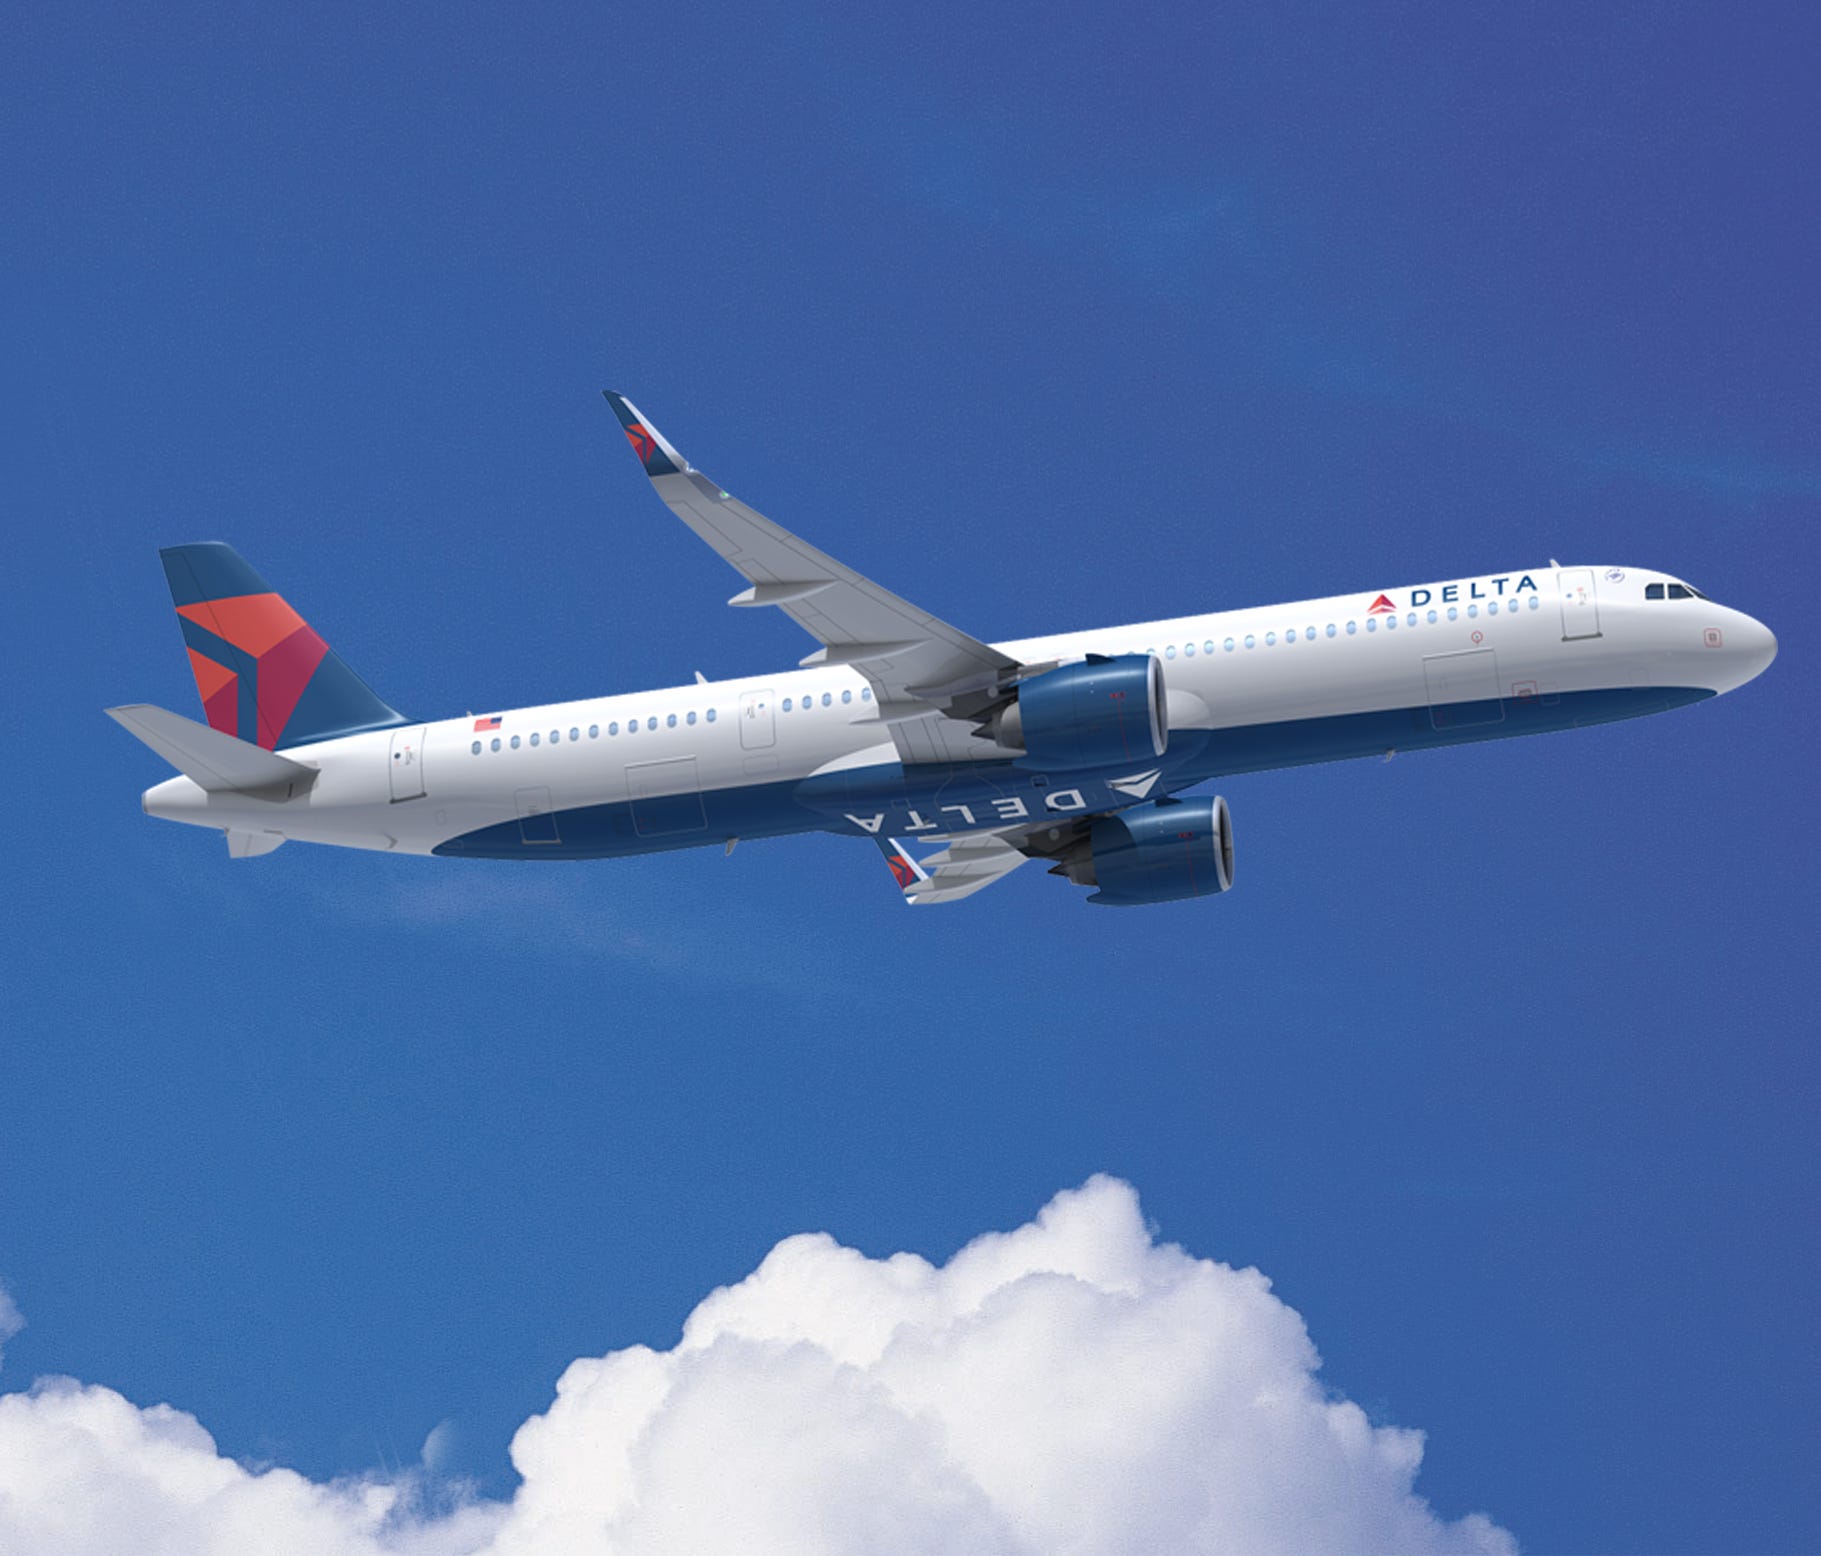 This undated image provided by Delta shows an Airbus A321neo in the colors of Delta Air Lines.